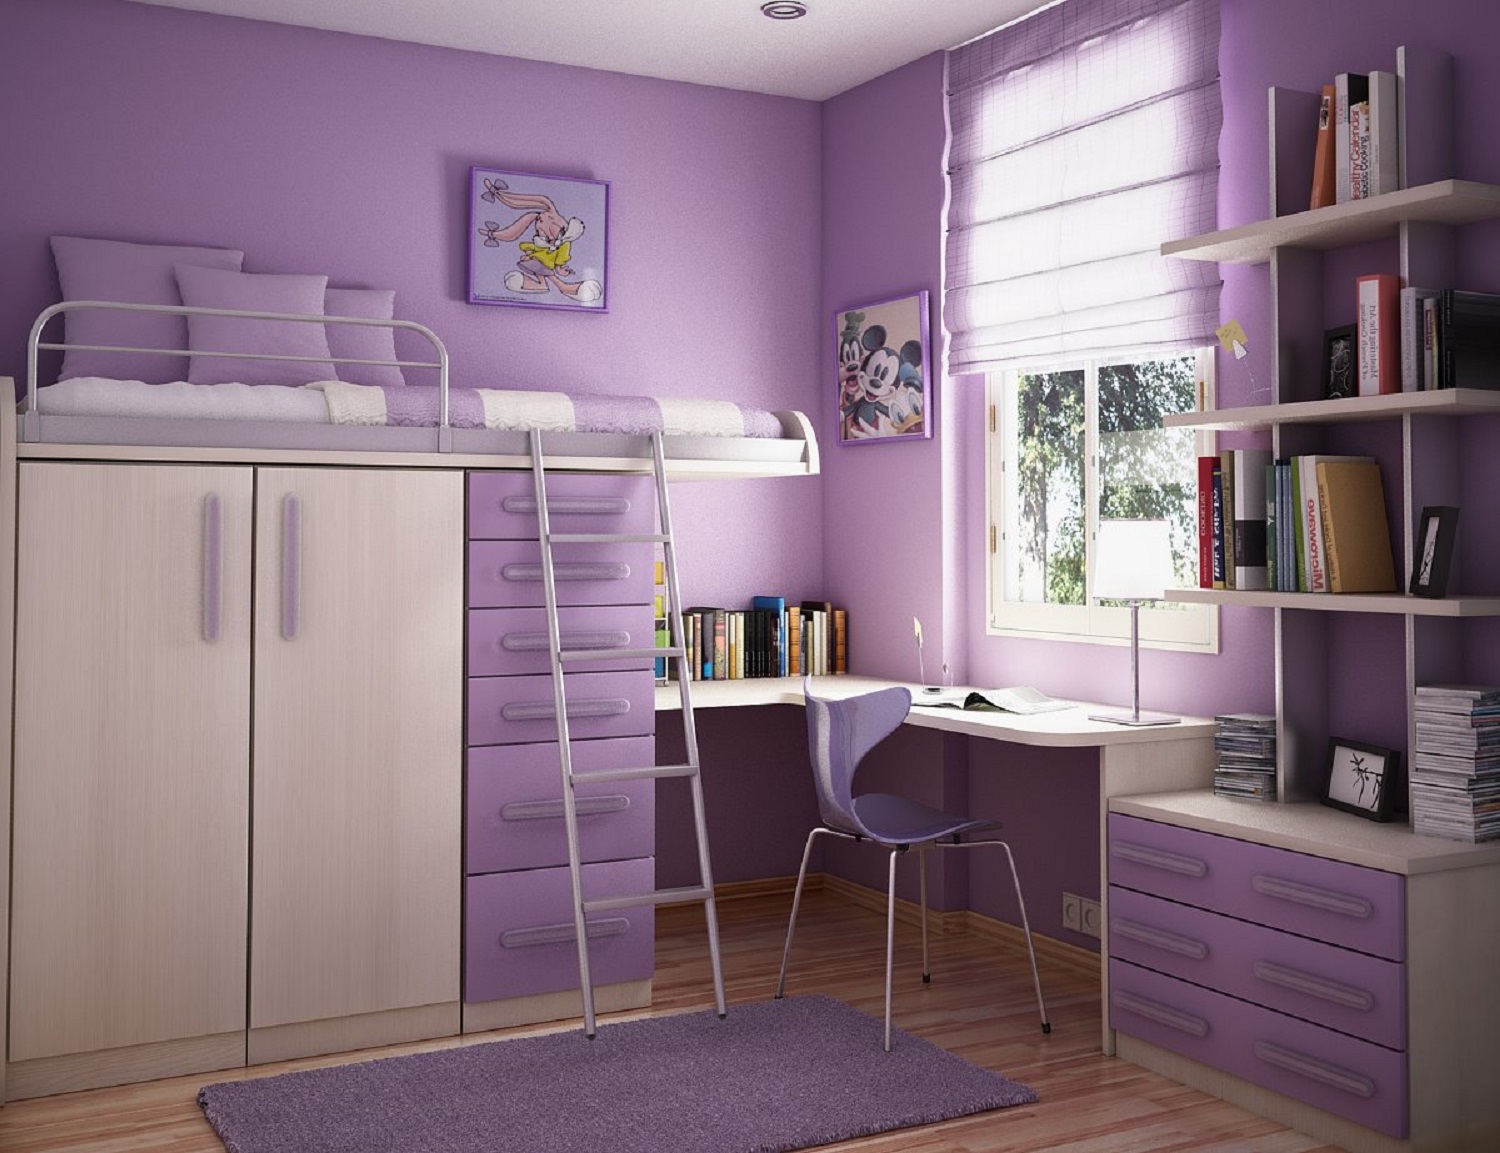 Declutter the Kids’ Rooms: Set Up like a Classroom